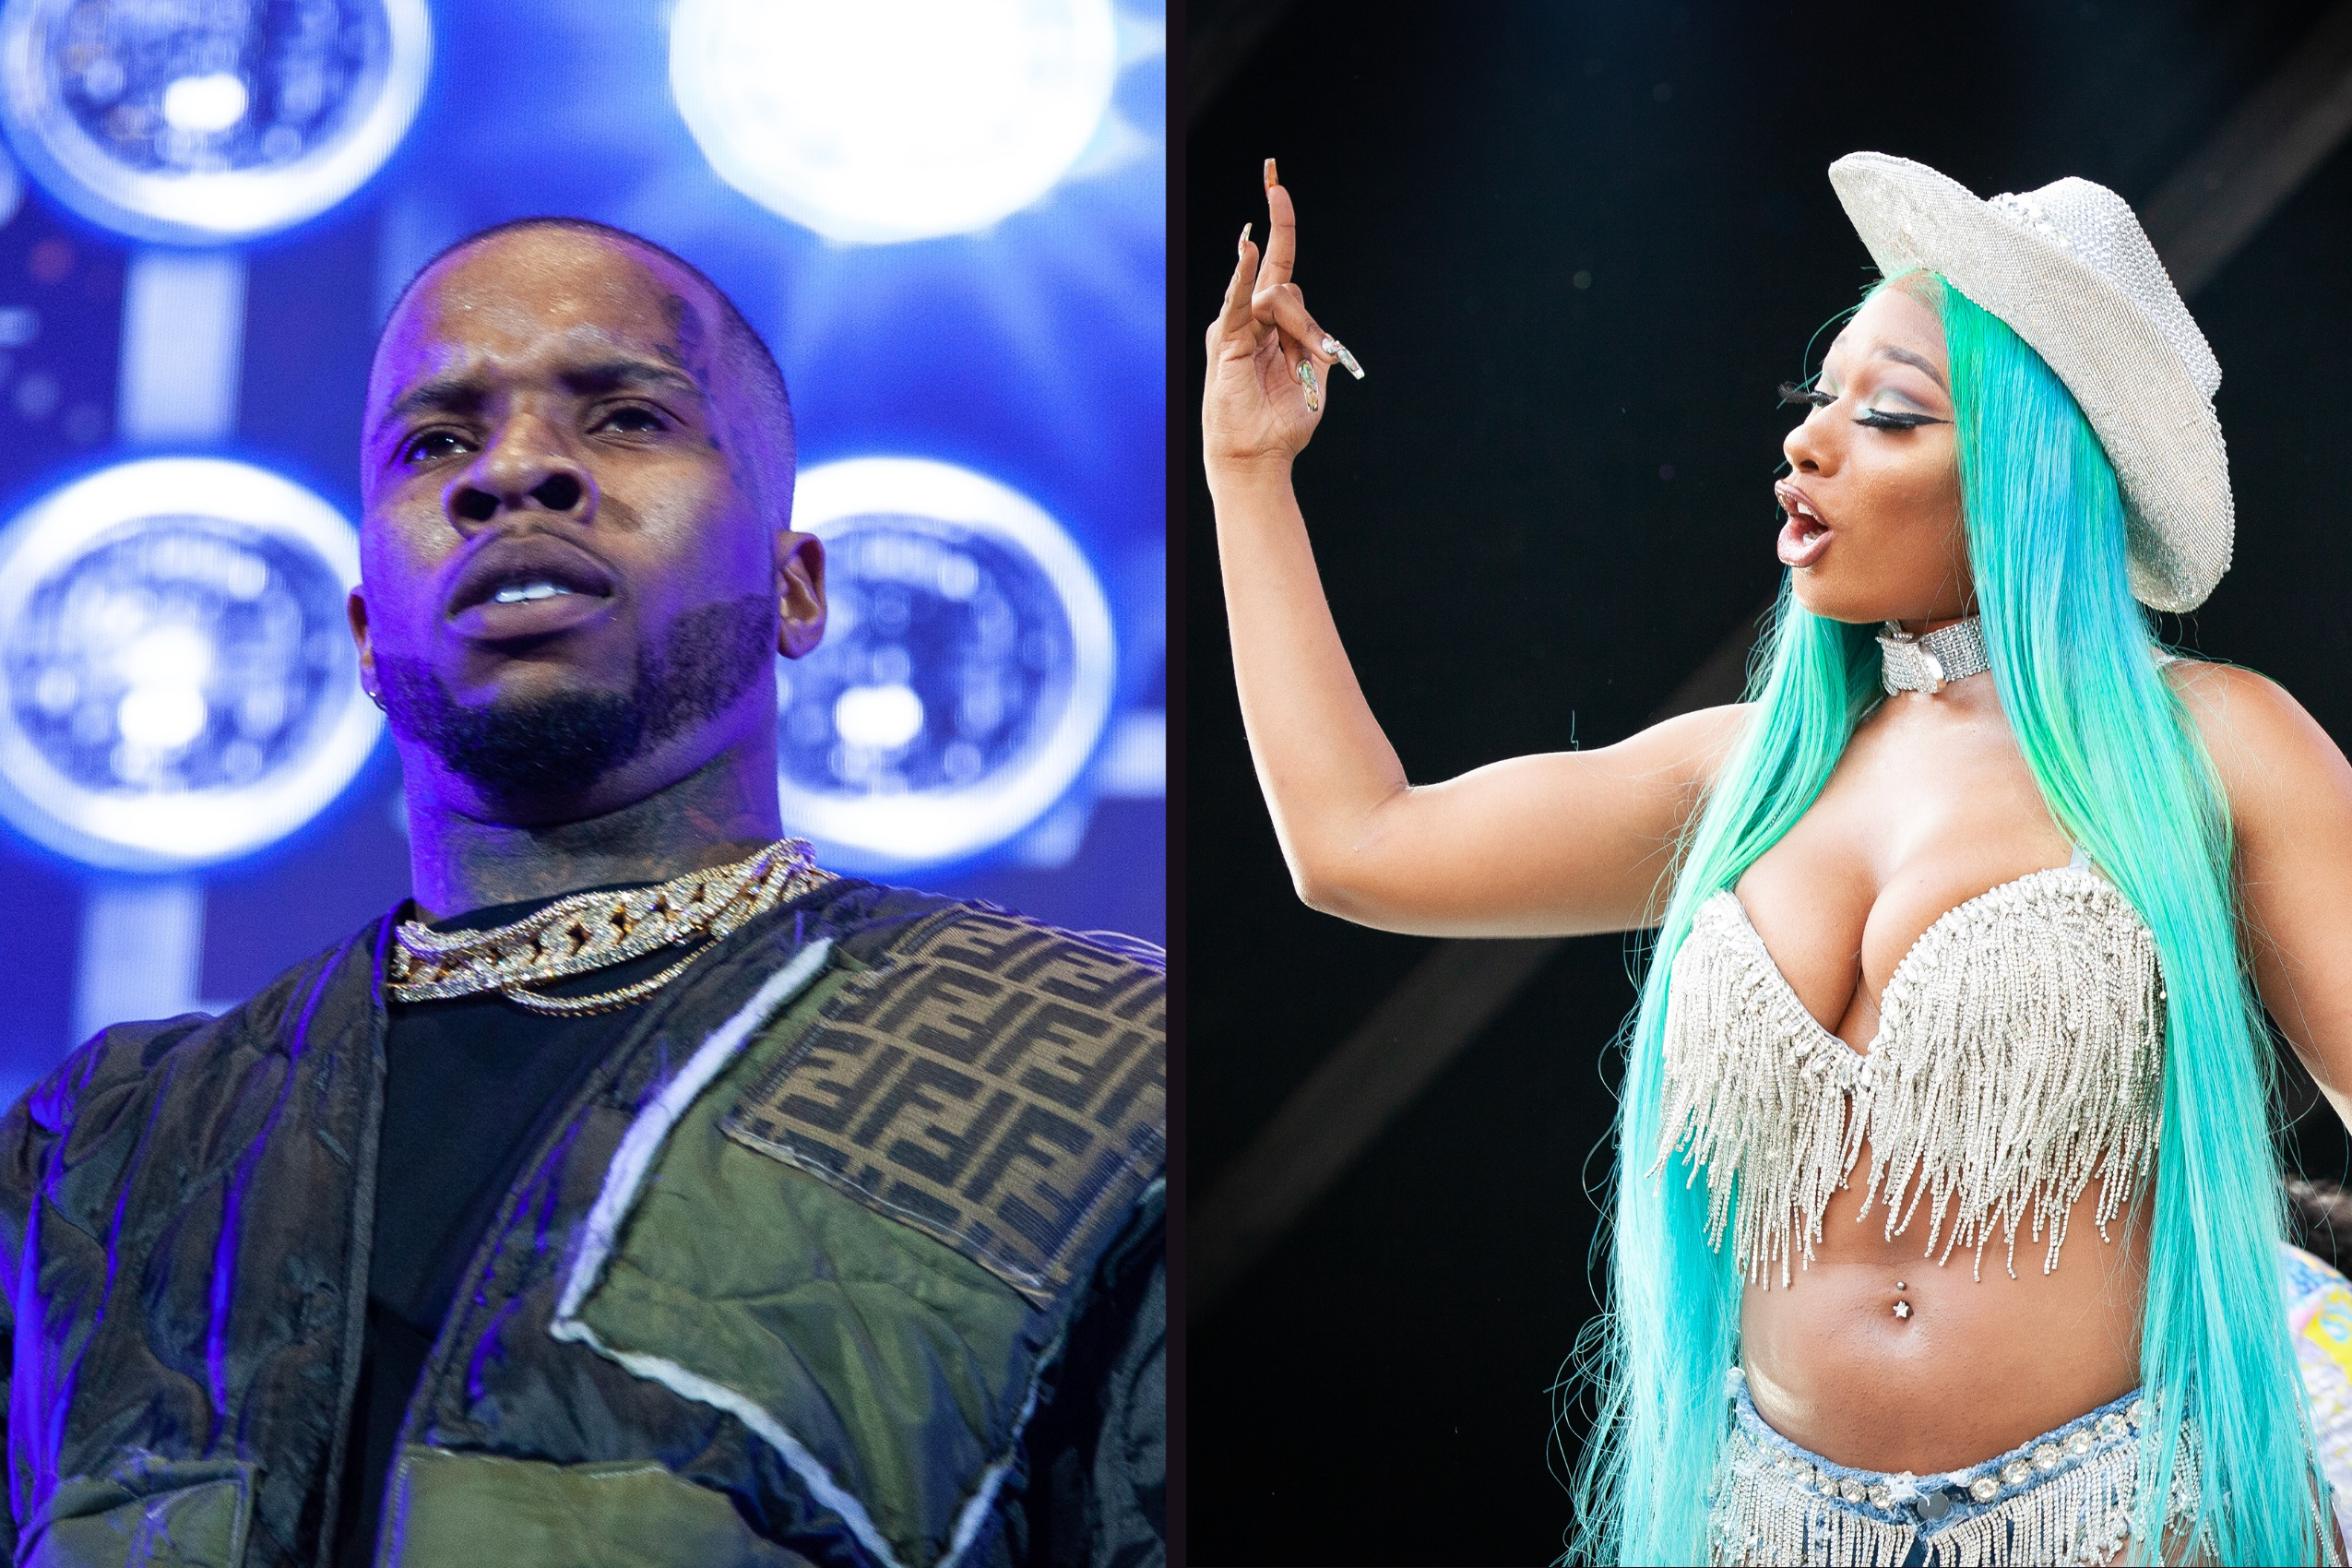 Tory Lanez Files Appeal Over Megan Thee Stallion Shooting Conviction, Claims Prosecution Used “Irrelevant” Evidence